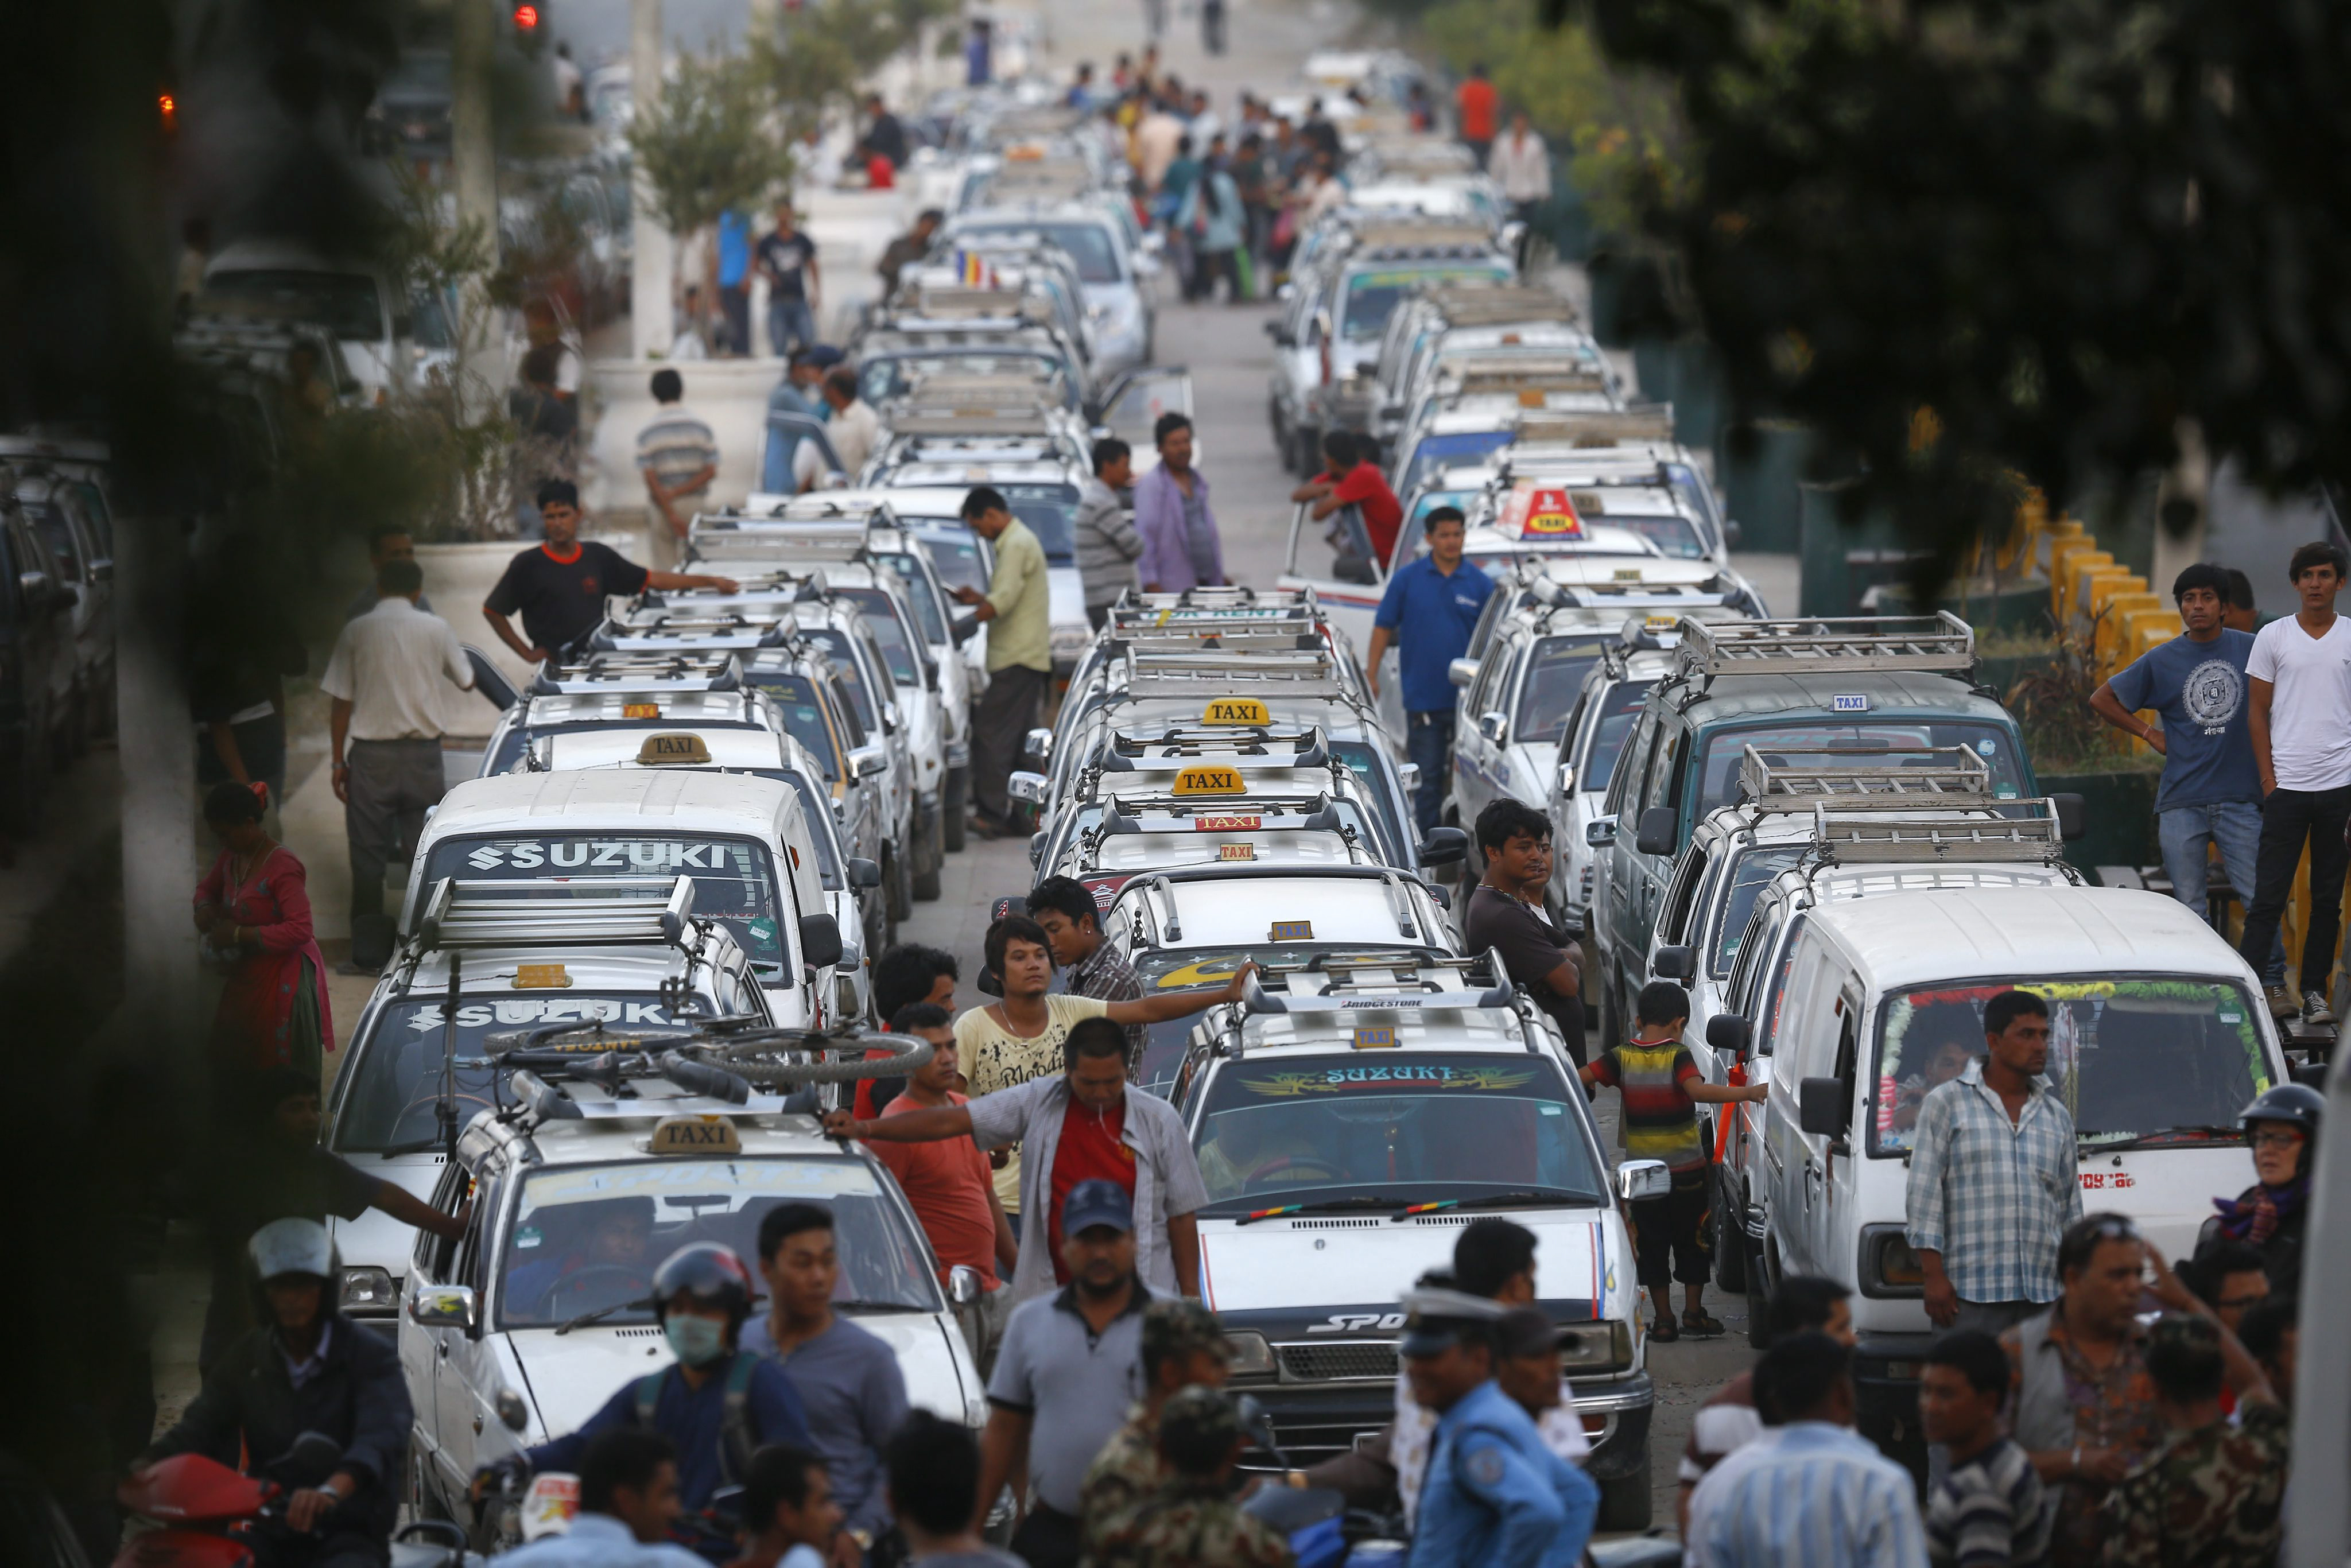 epa04958716 A line of taxis as drivers wait for fuel at a petrol station in Kathmandu, Nepal, 01 October 2015. The Nepalese are facing an acute crisis of petroleum products and other essential commodities after neighboring India stopped supplies. The Nepalese government has stopped providing fuel to private number plate vehicles across the country due to the fuel shortage. Nepal, a small landlocked country, depends on supplies from India. EPA/NARENDRA SHRESTHA